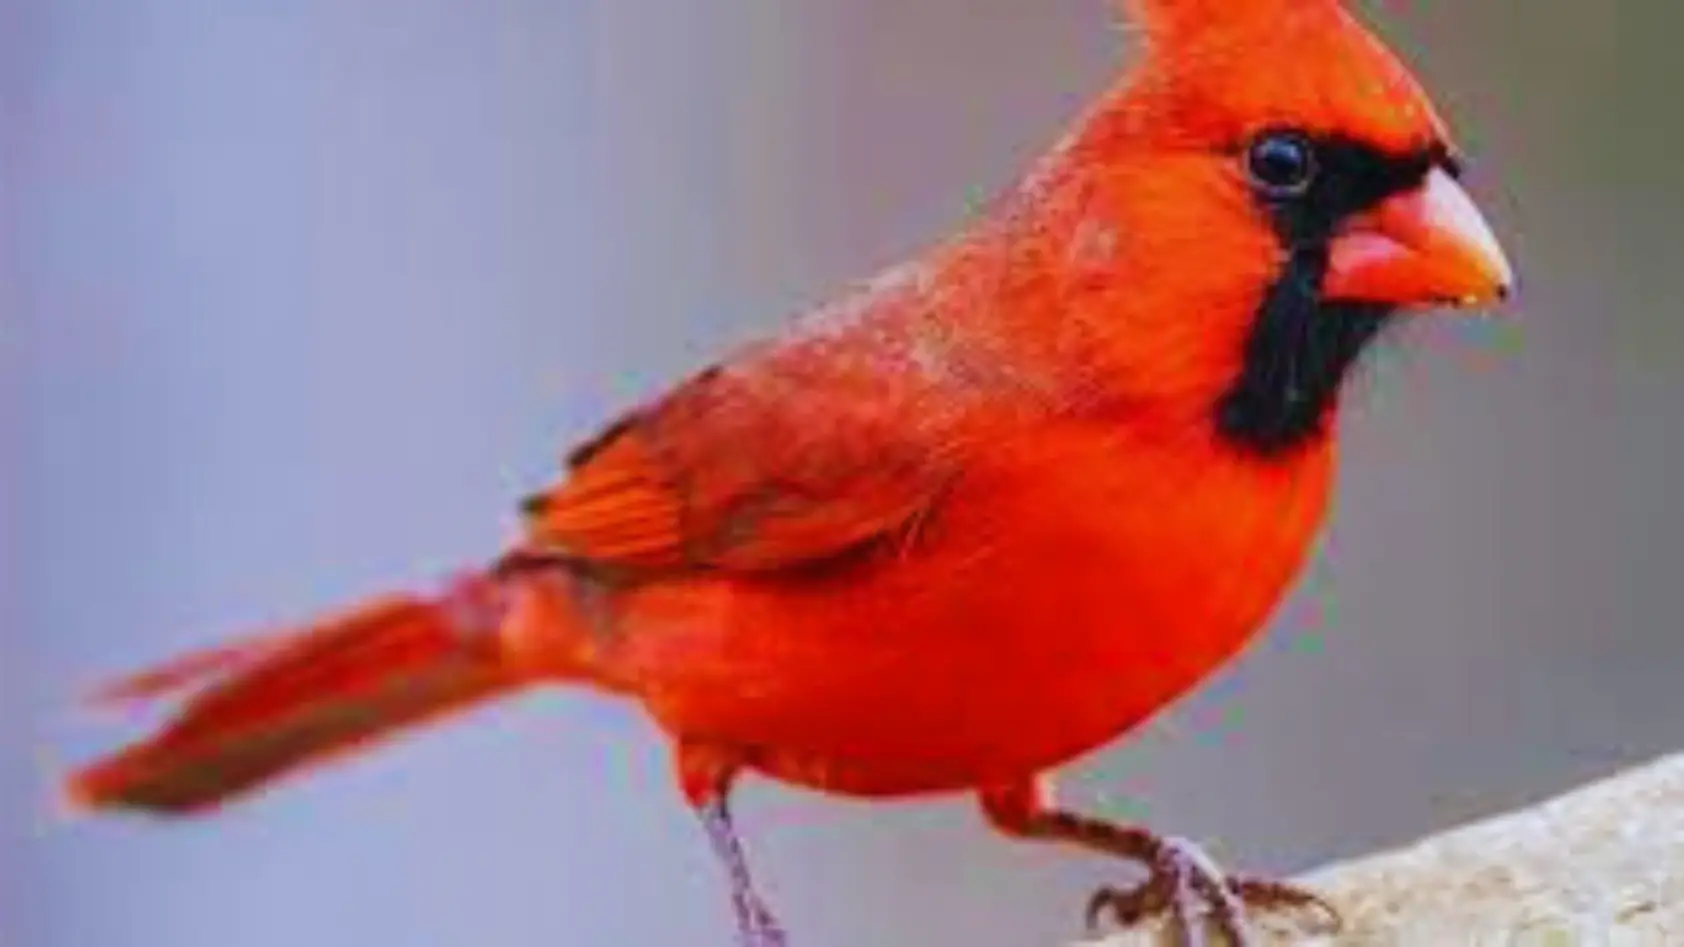 What Sound Does A Cardinal Make?